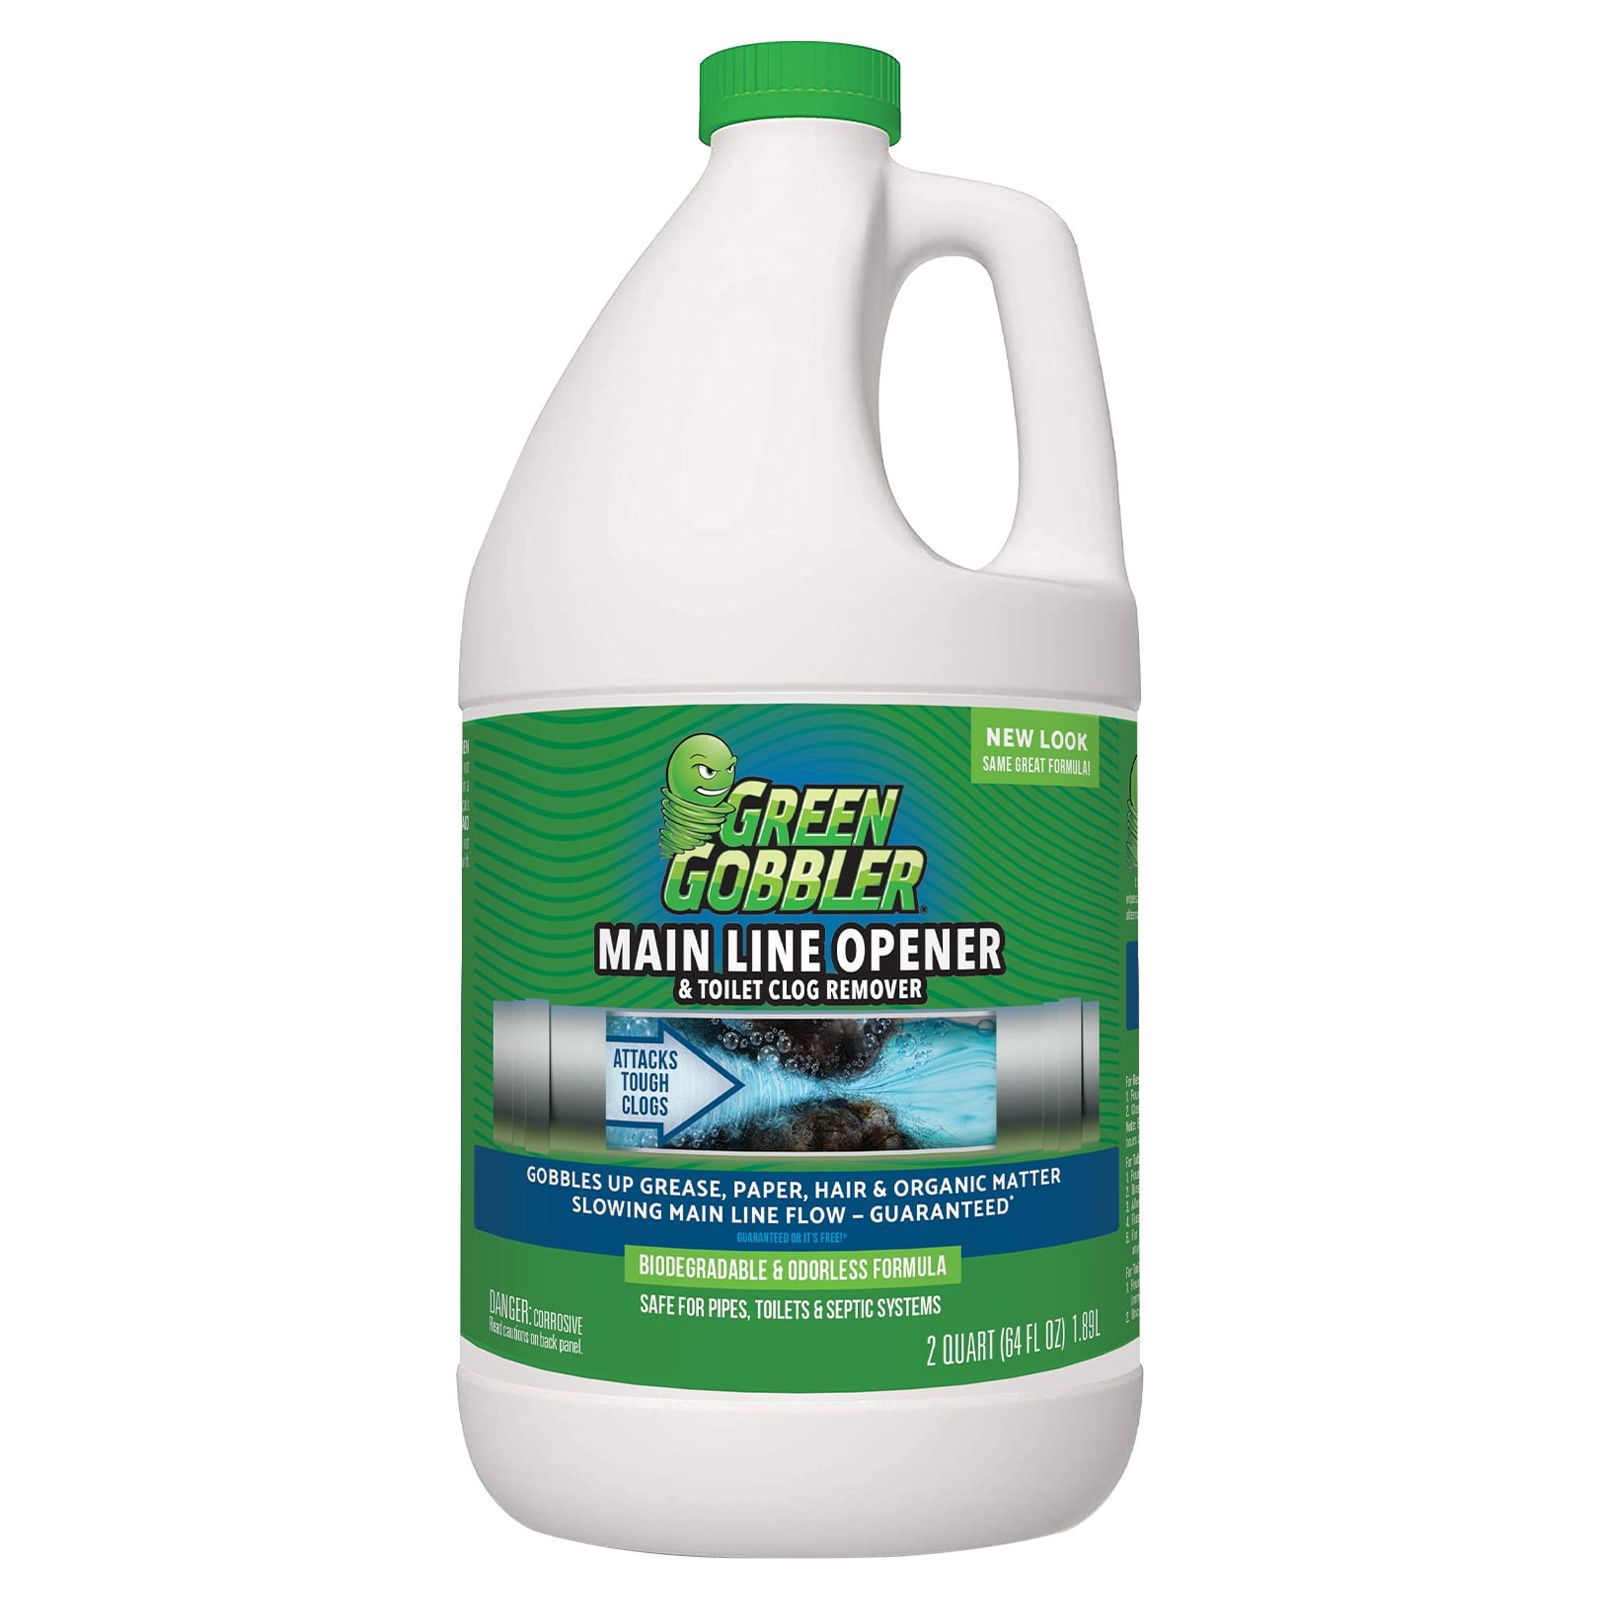 Green Gobbler Ultimate Main Drain Opener | Drain Cleaner Hair Clog Remover | Works On Main Lines, Sinks, Tubs, Toilets, Showers, Kitchen Sinks | 64 fl. oz. - image 1 of 9